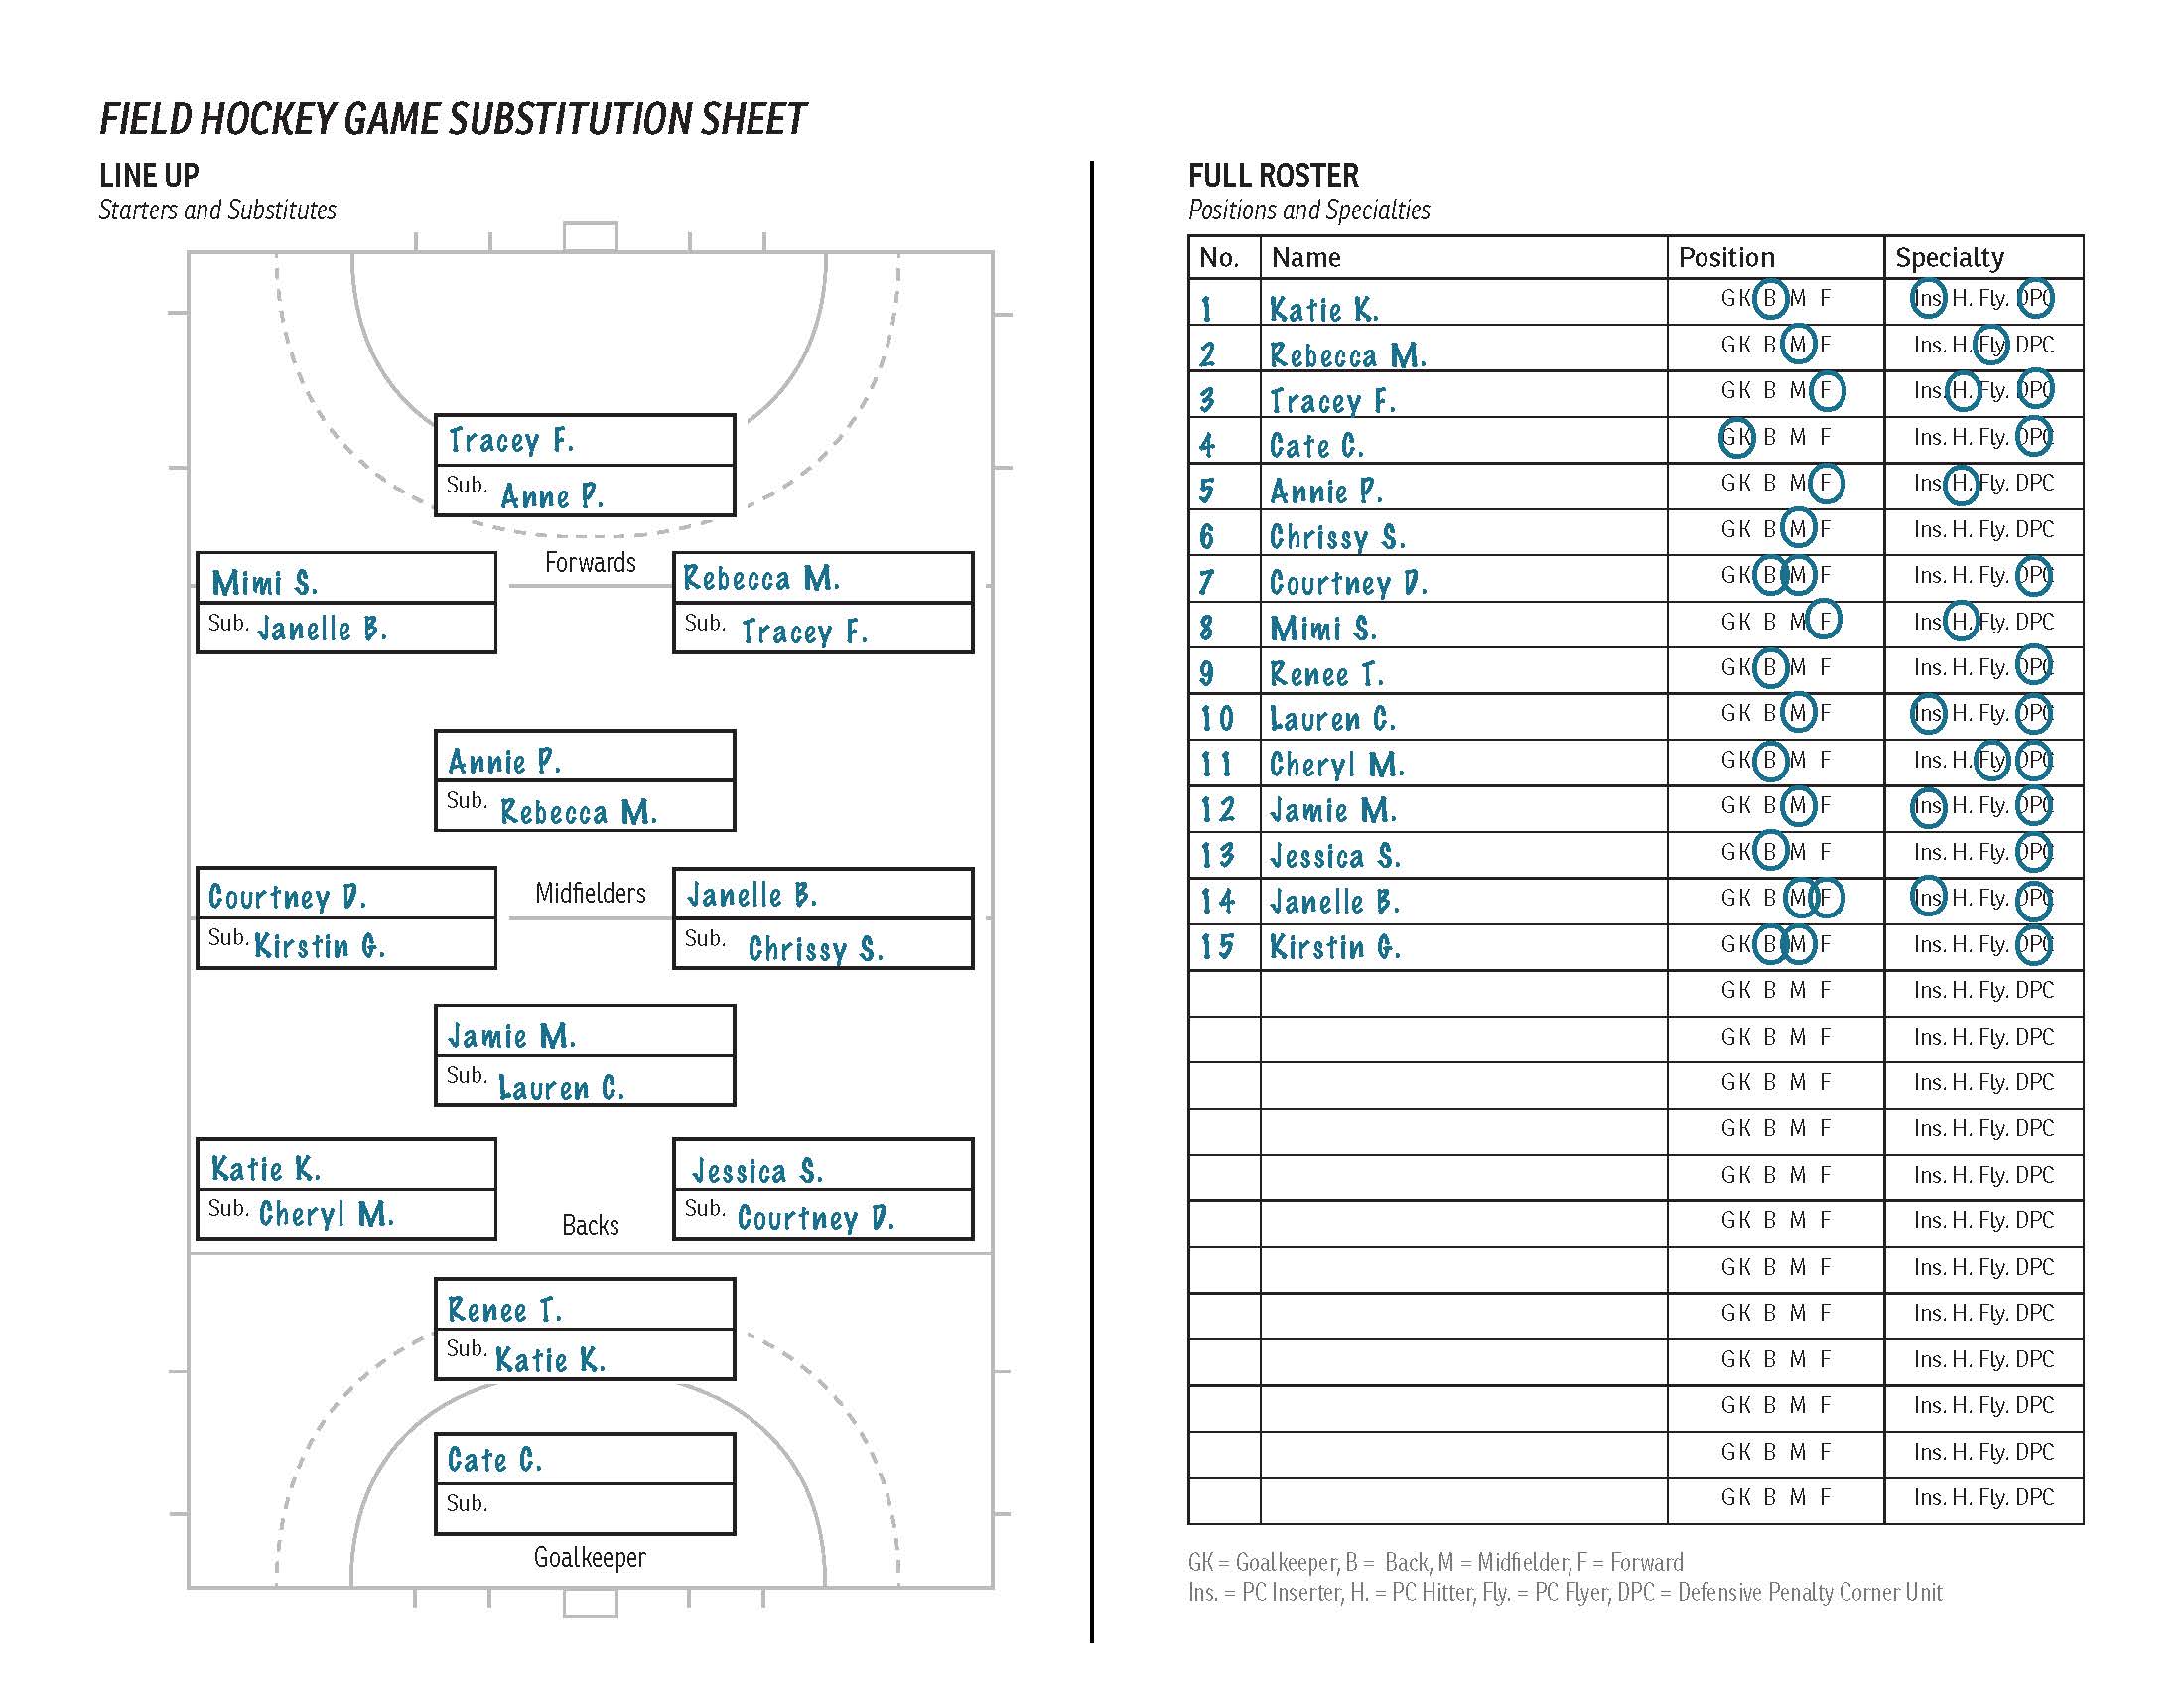 NFHCA basic field hockey substitution sheet with examples